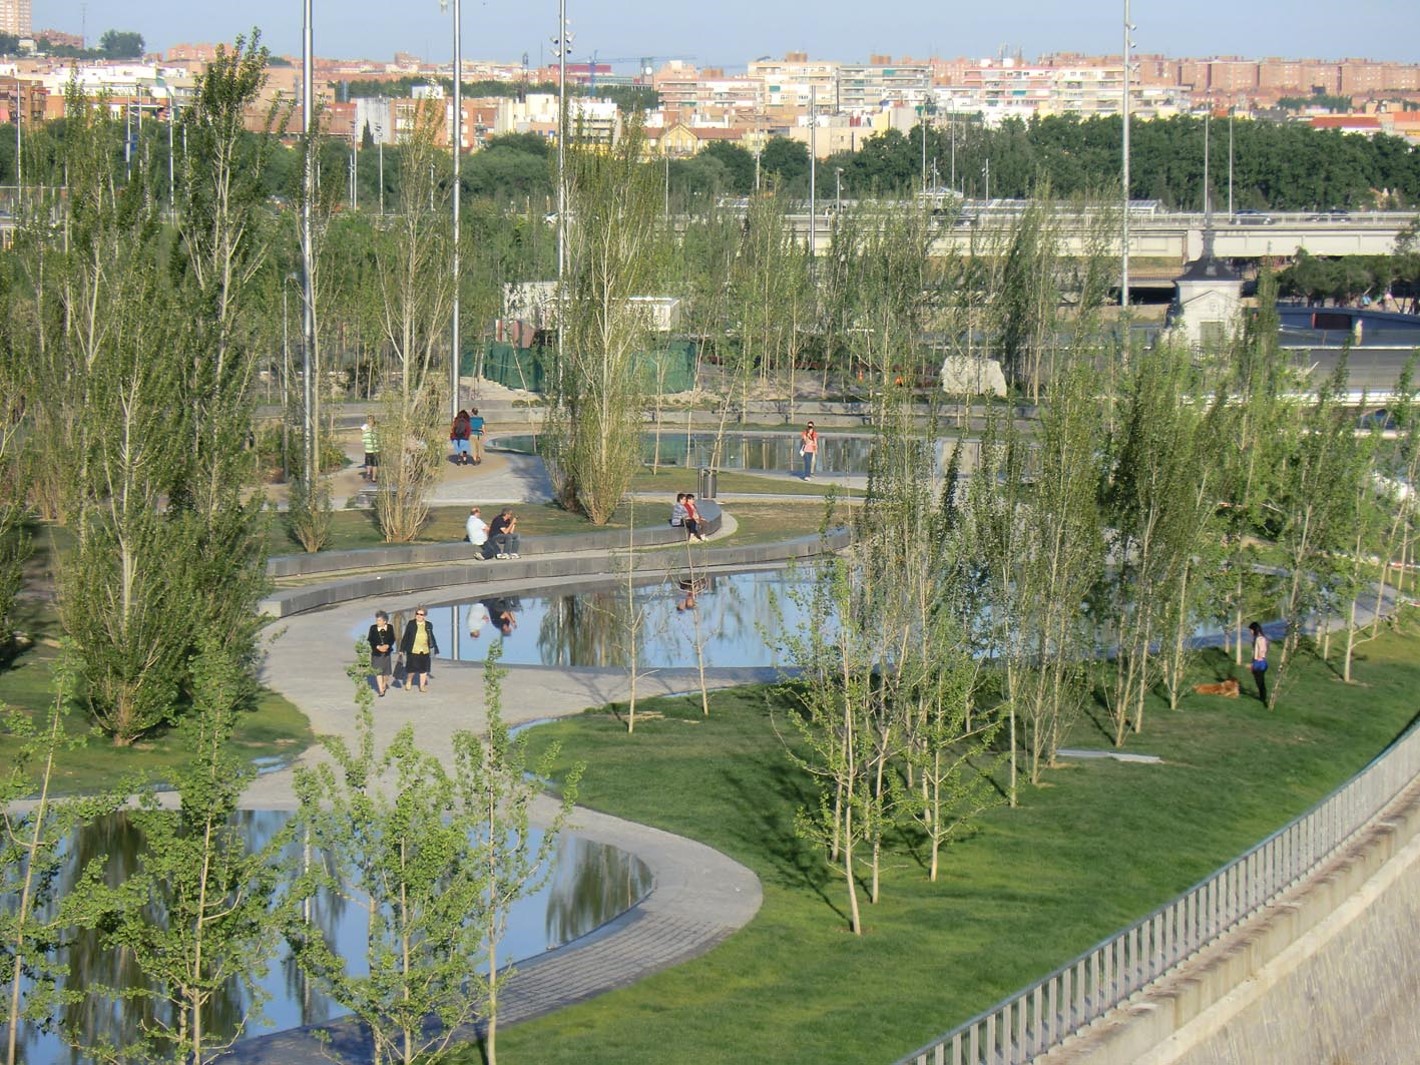 MADRID RÍO, a new green public space